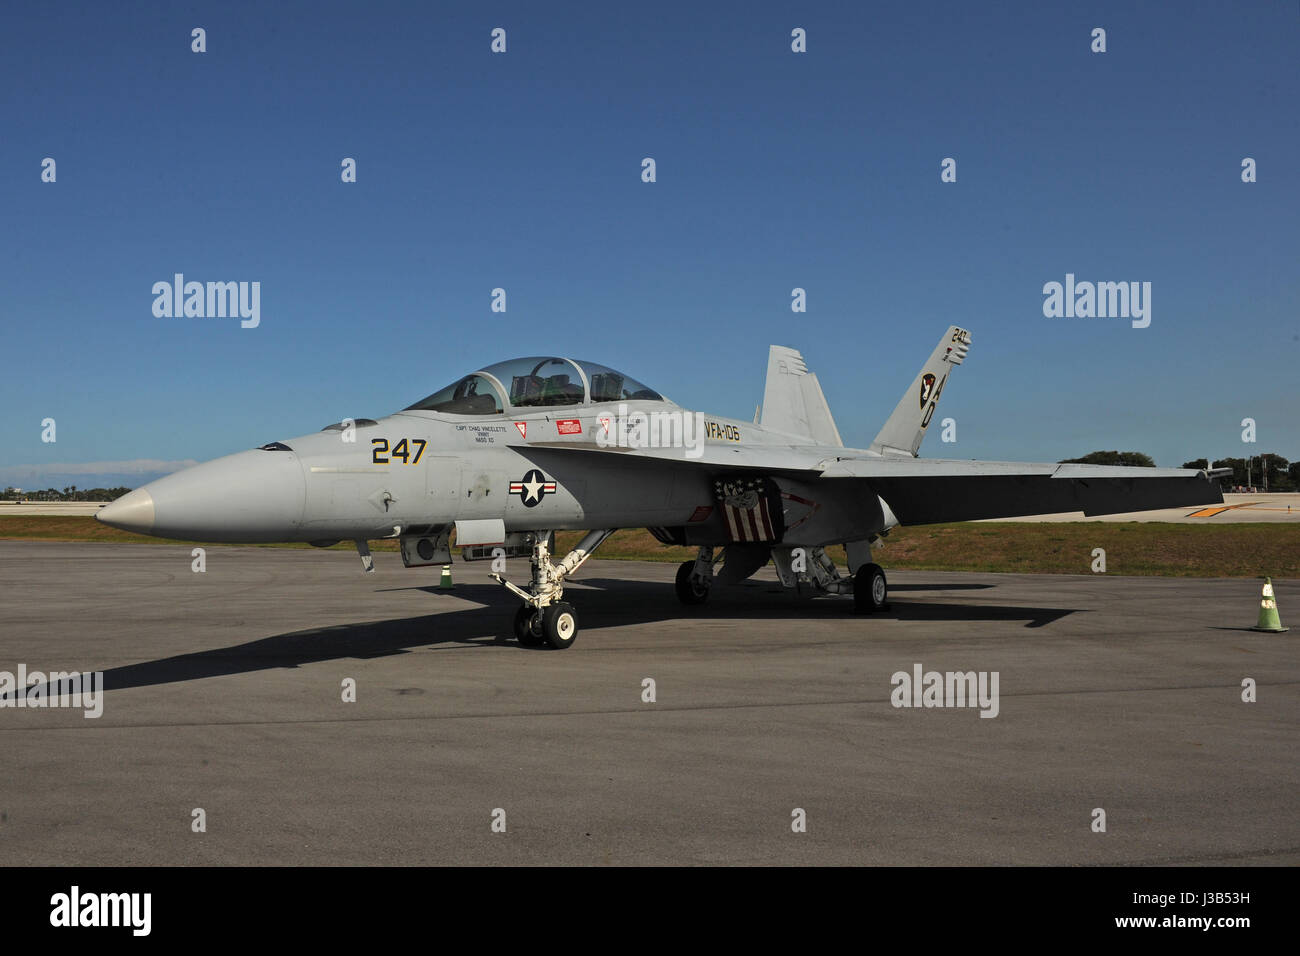 FORT LAUDERDALE FL - MAY 04: U.S. Navy F/A-18F Super Hornet sits on the tarmac at Fort Lauderdale Executive Airport during Fort Lauderdale Air Show Media day on May 4, 2017 in Fort Lauderdale, Florida. Credit: mpi04/MediaPunch Stock Photo